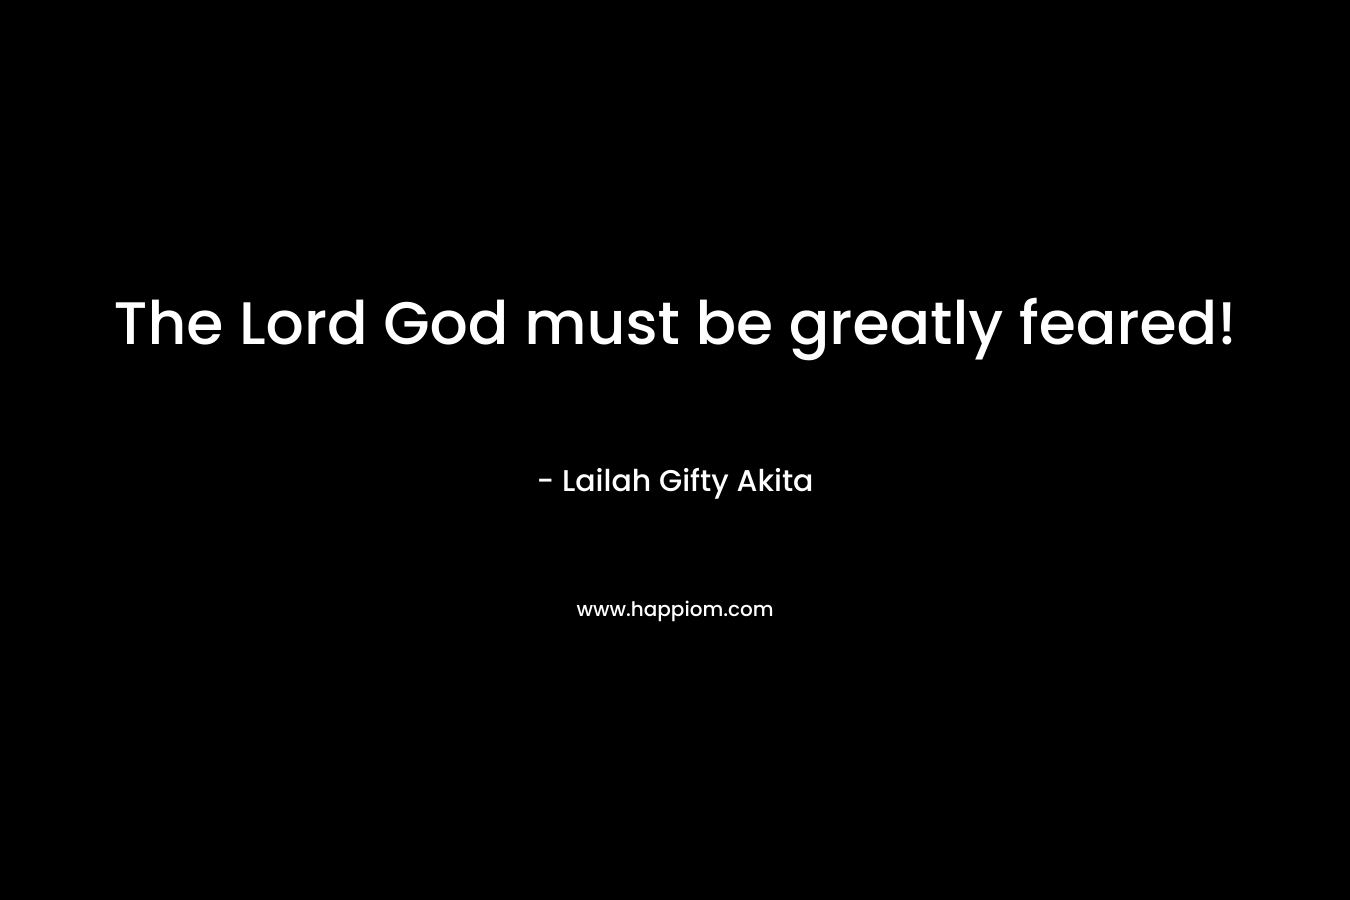 The Lord God must be greatly feared!